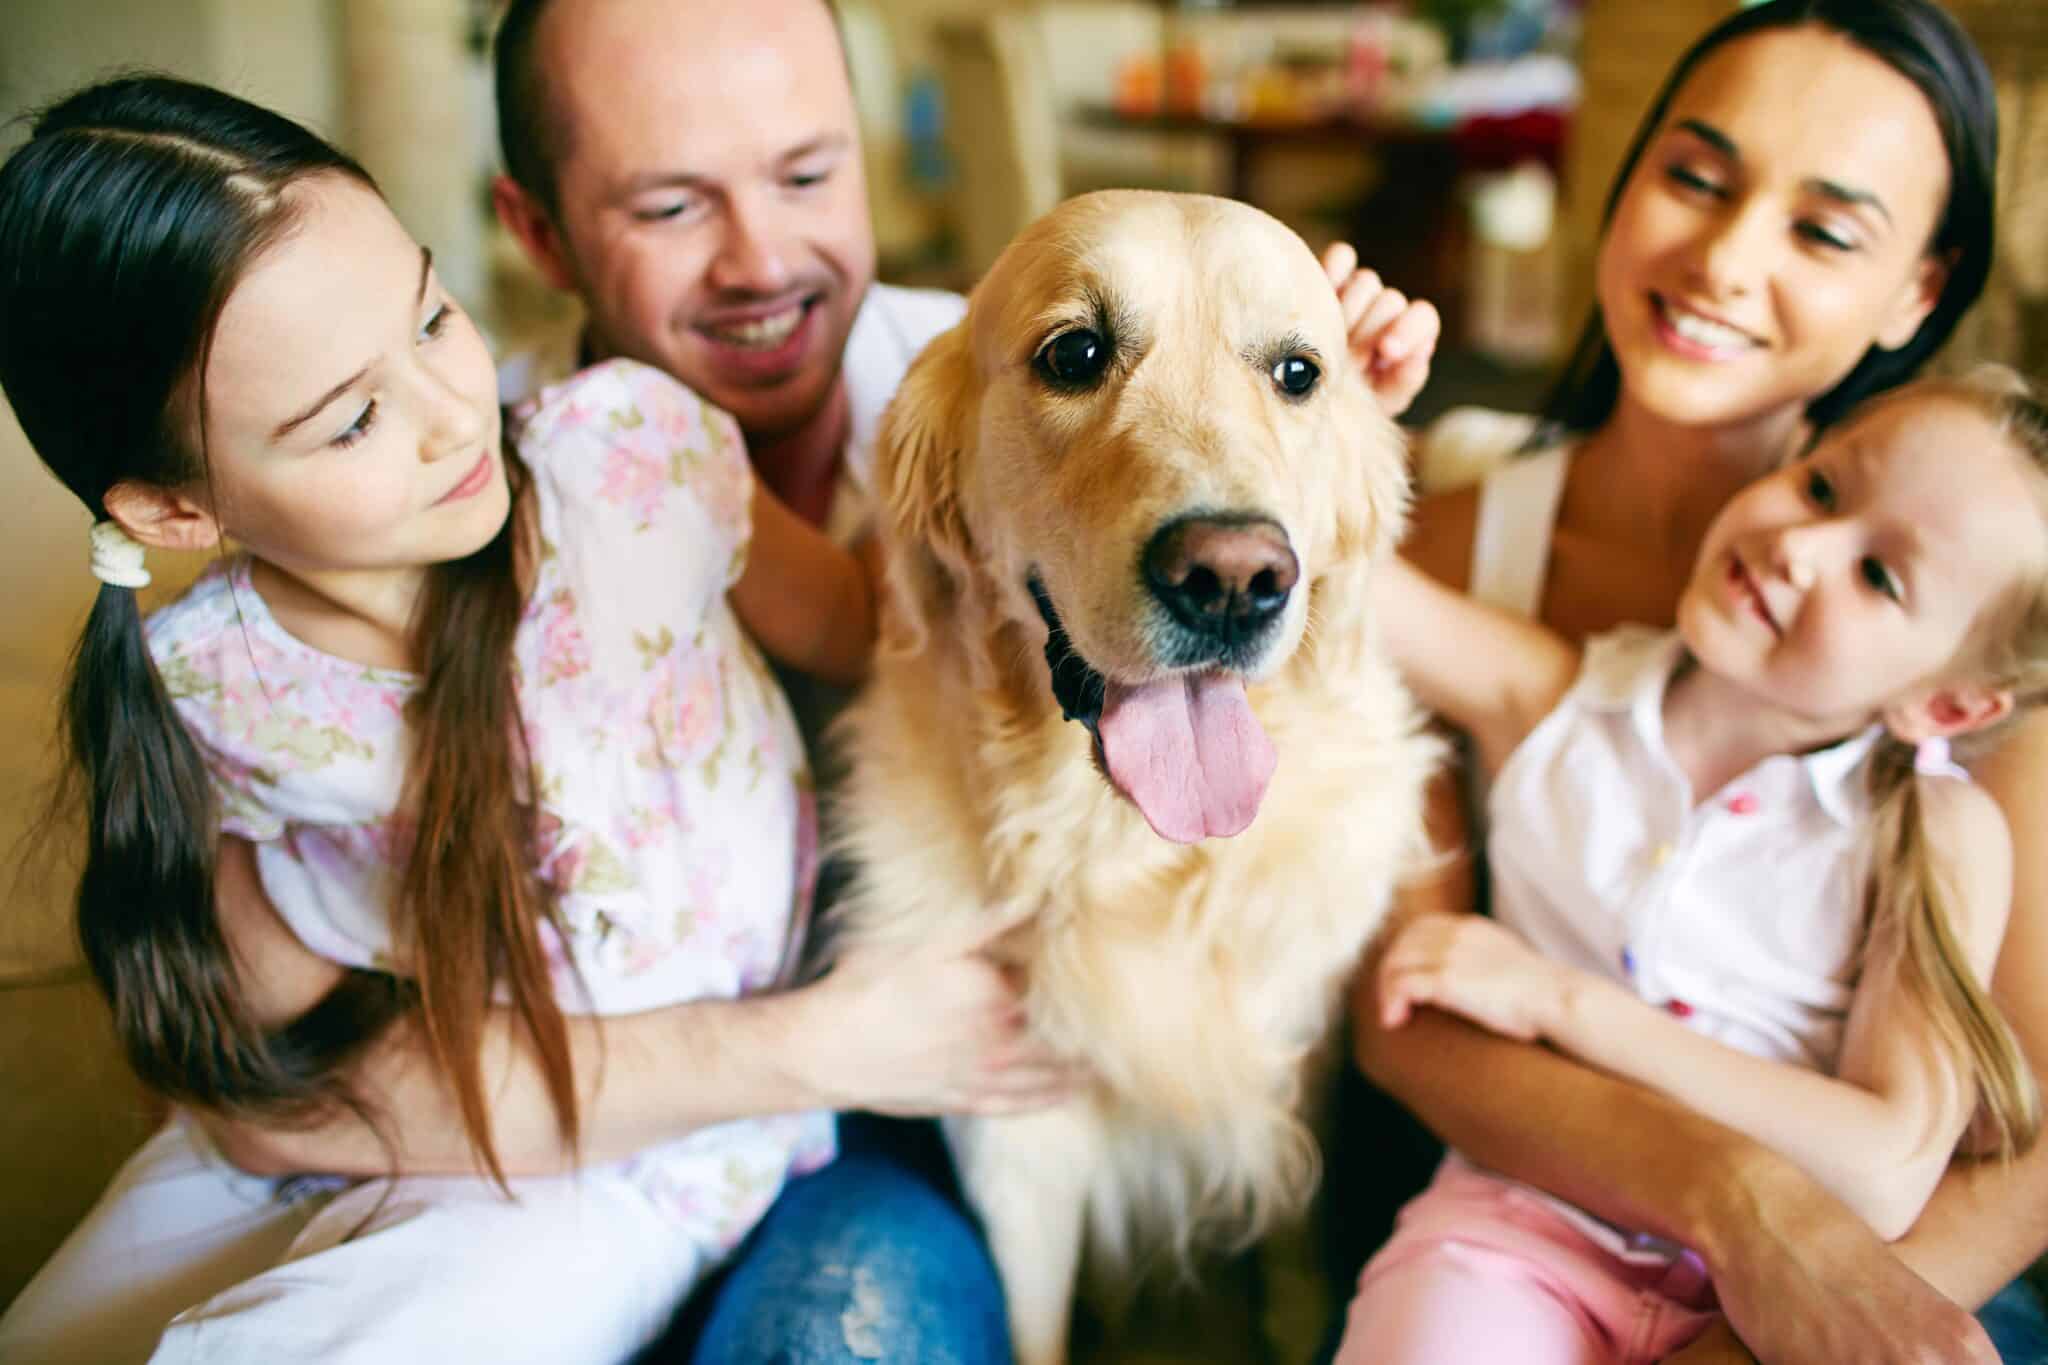 Golden retriever sitting in the middle of family.